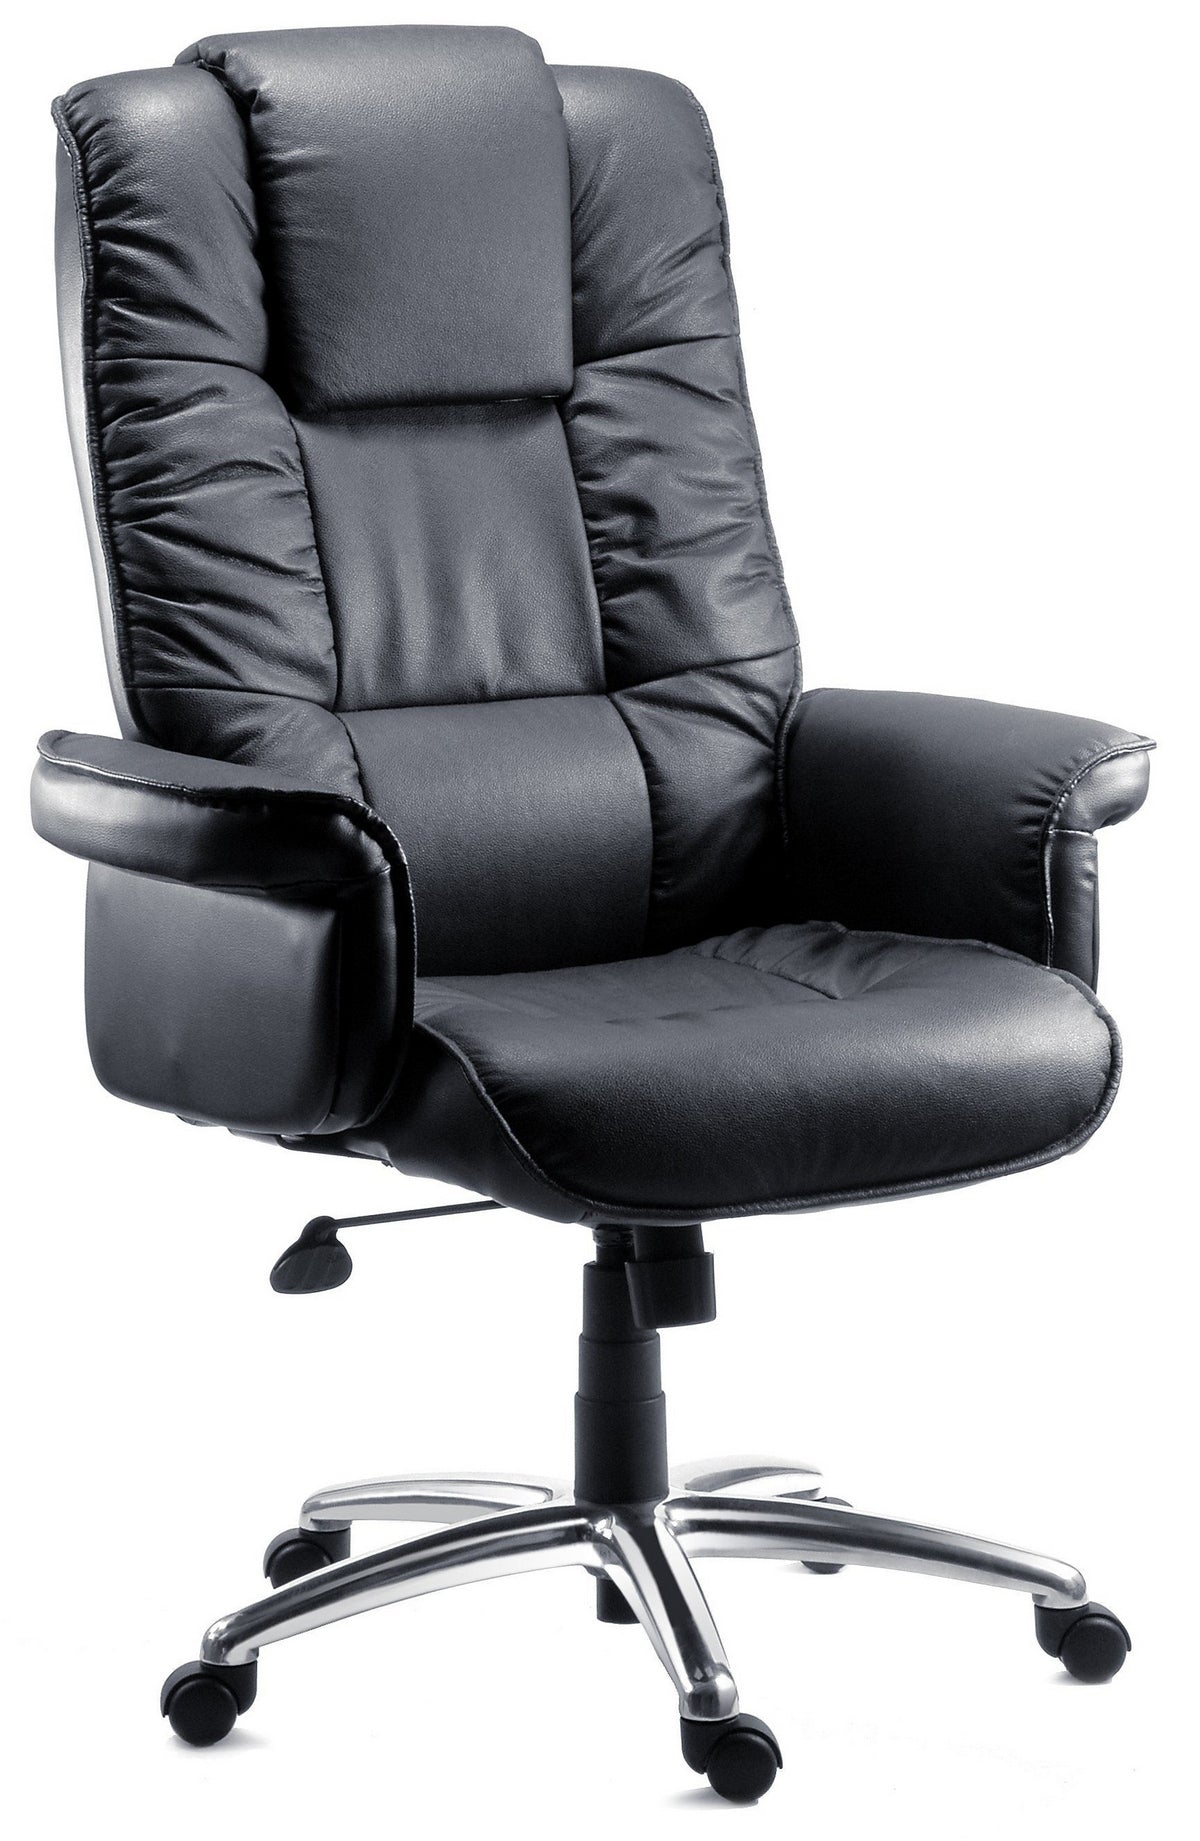 Black Leather Executive Office Chair - LOMBARD